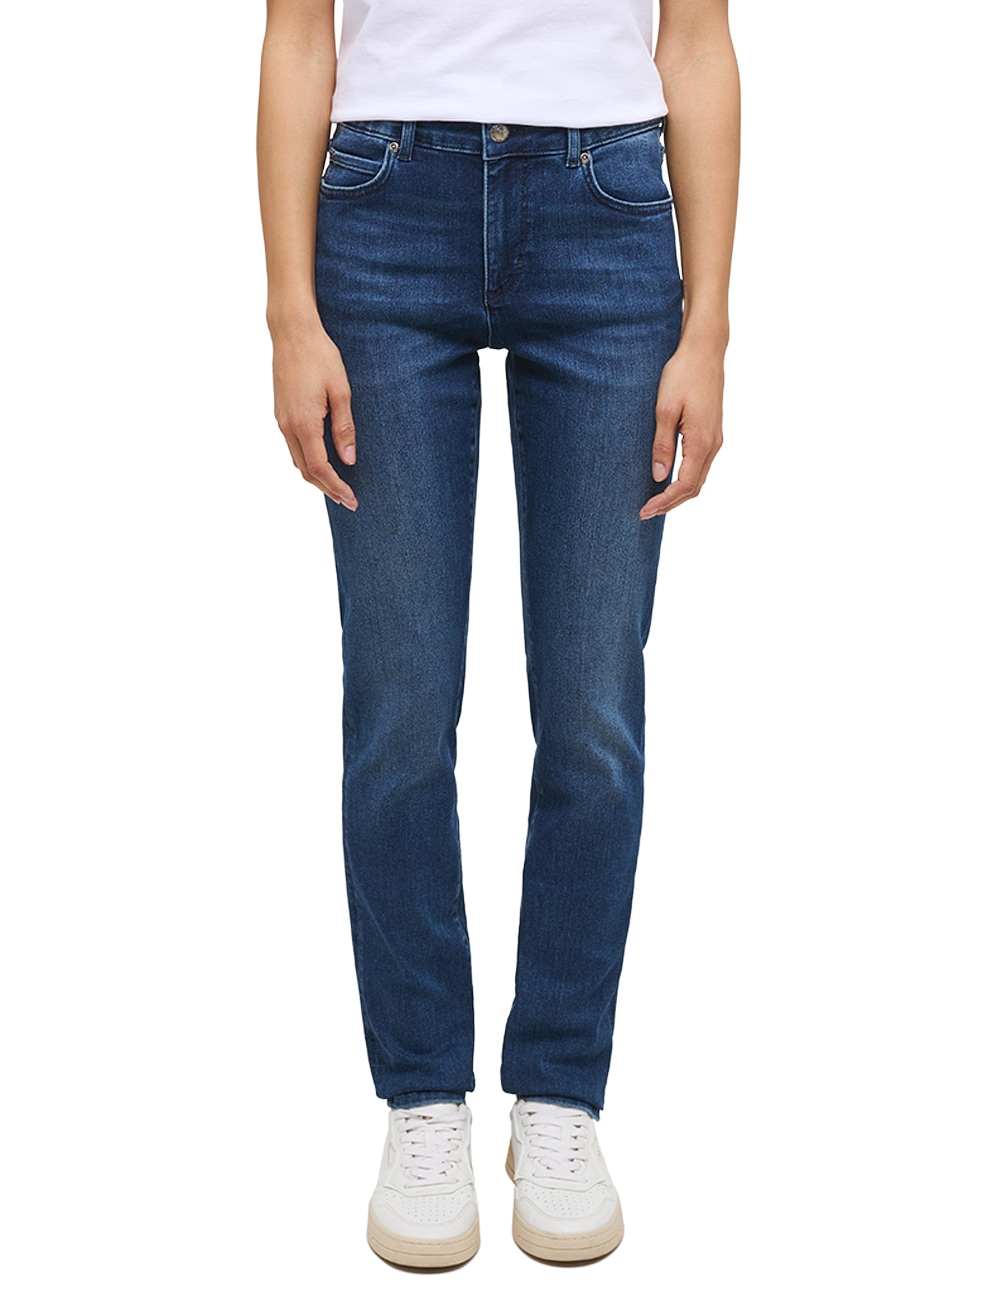 MUSTANG 5-Pocket-Jeans »Style Crosby Relaxed Slim« von Mustang